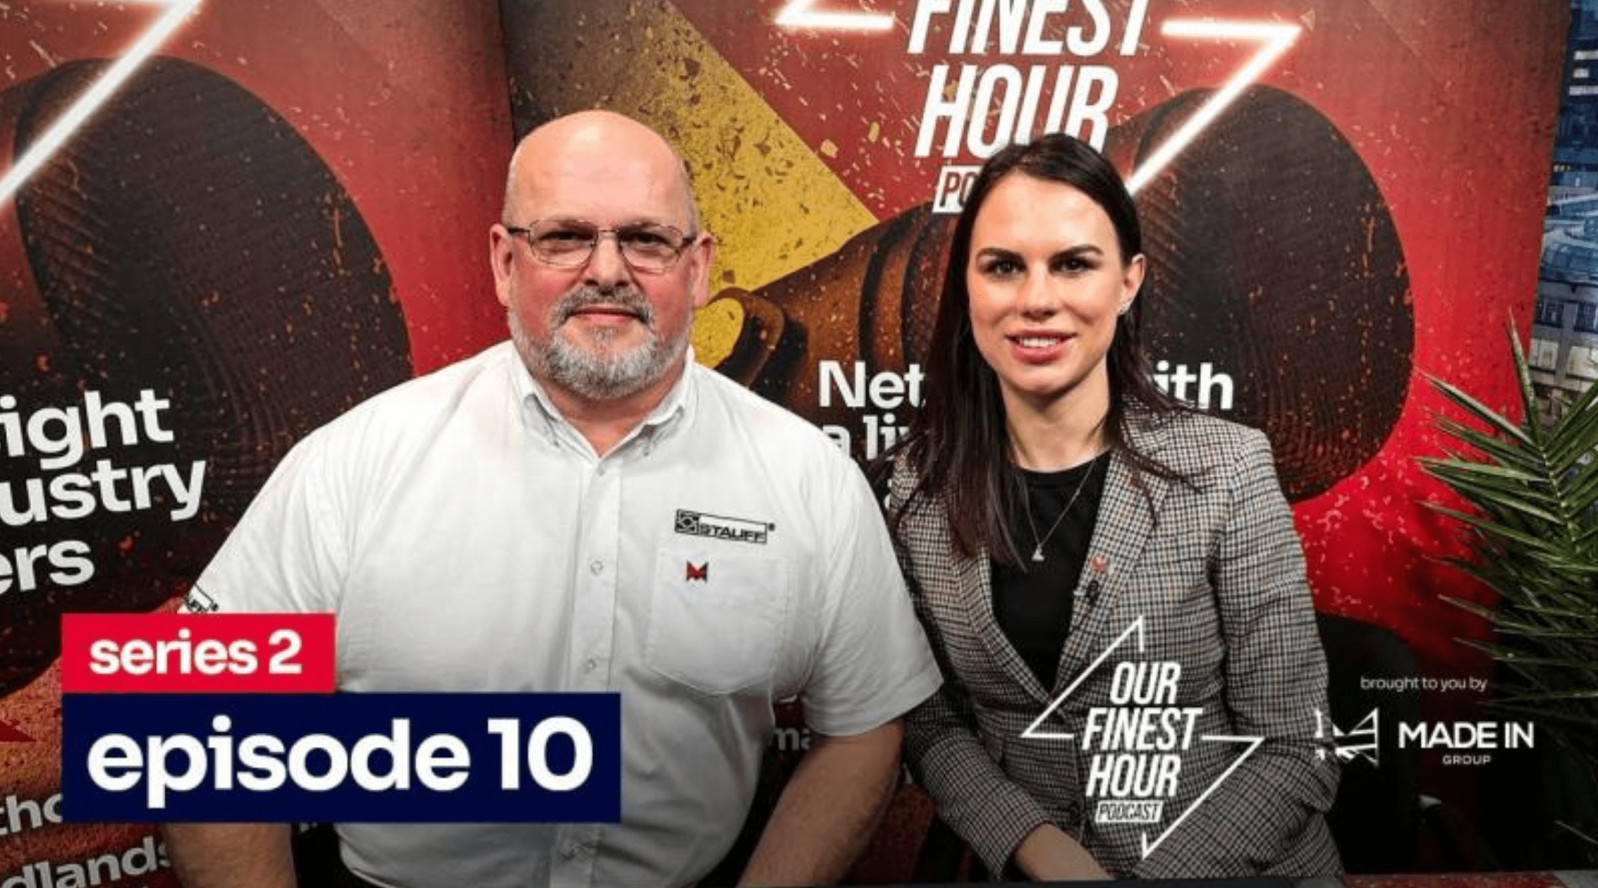 Our Finest Hour Ep. 10: From Printer to MarCom Ind...